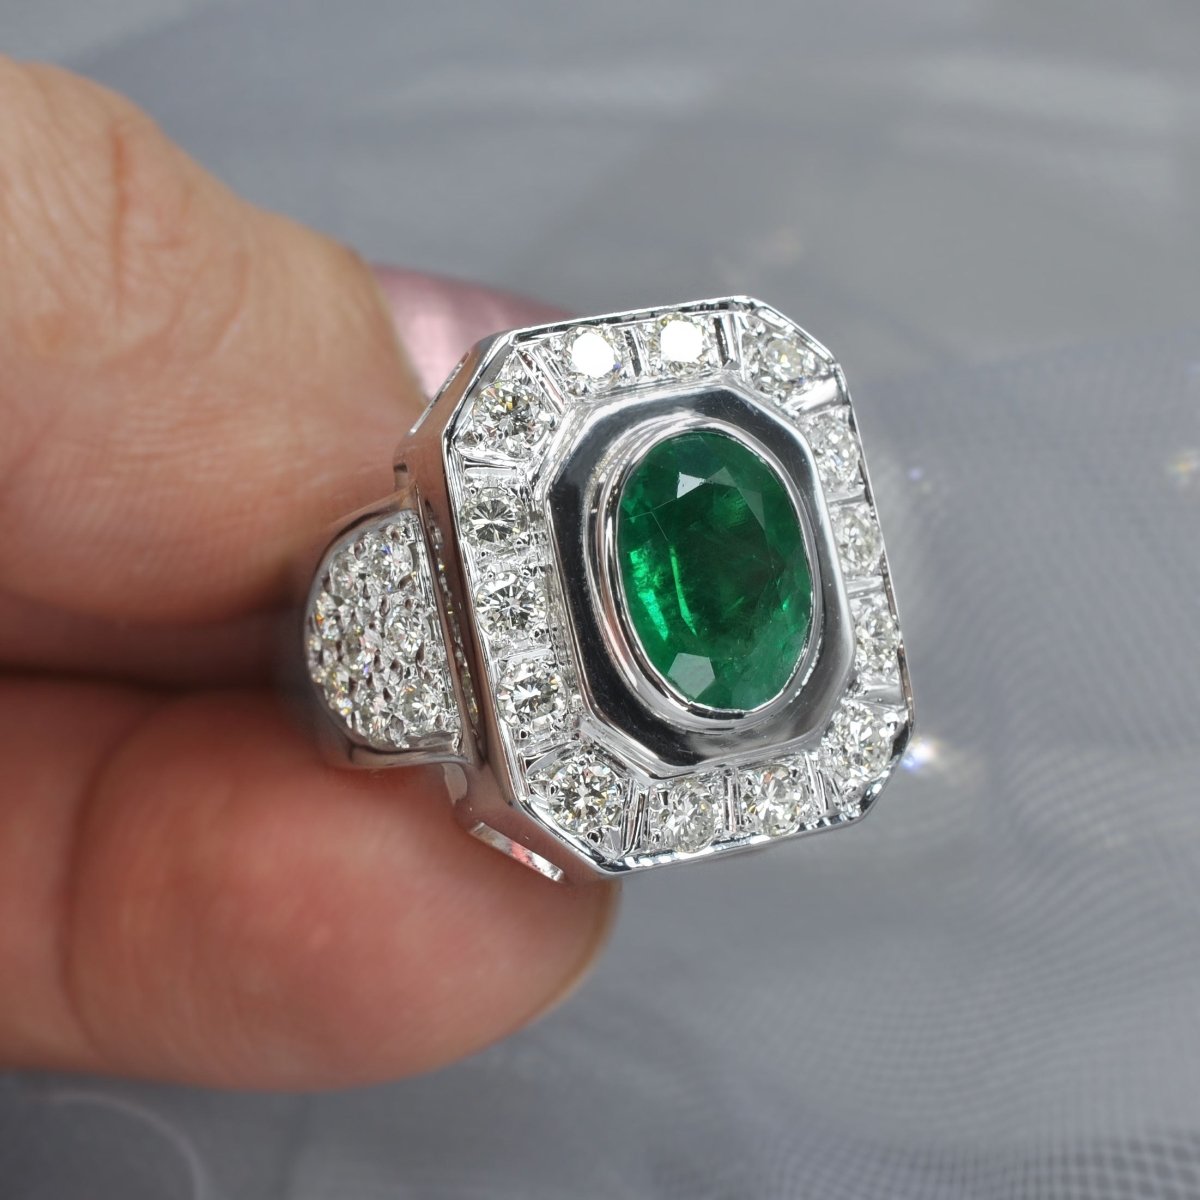 Certified 6.50CT Round and Oval Cut Diamond and Green Emerald Mens Ring in 14KT White Gold - Primestyle.com